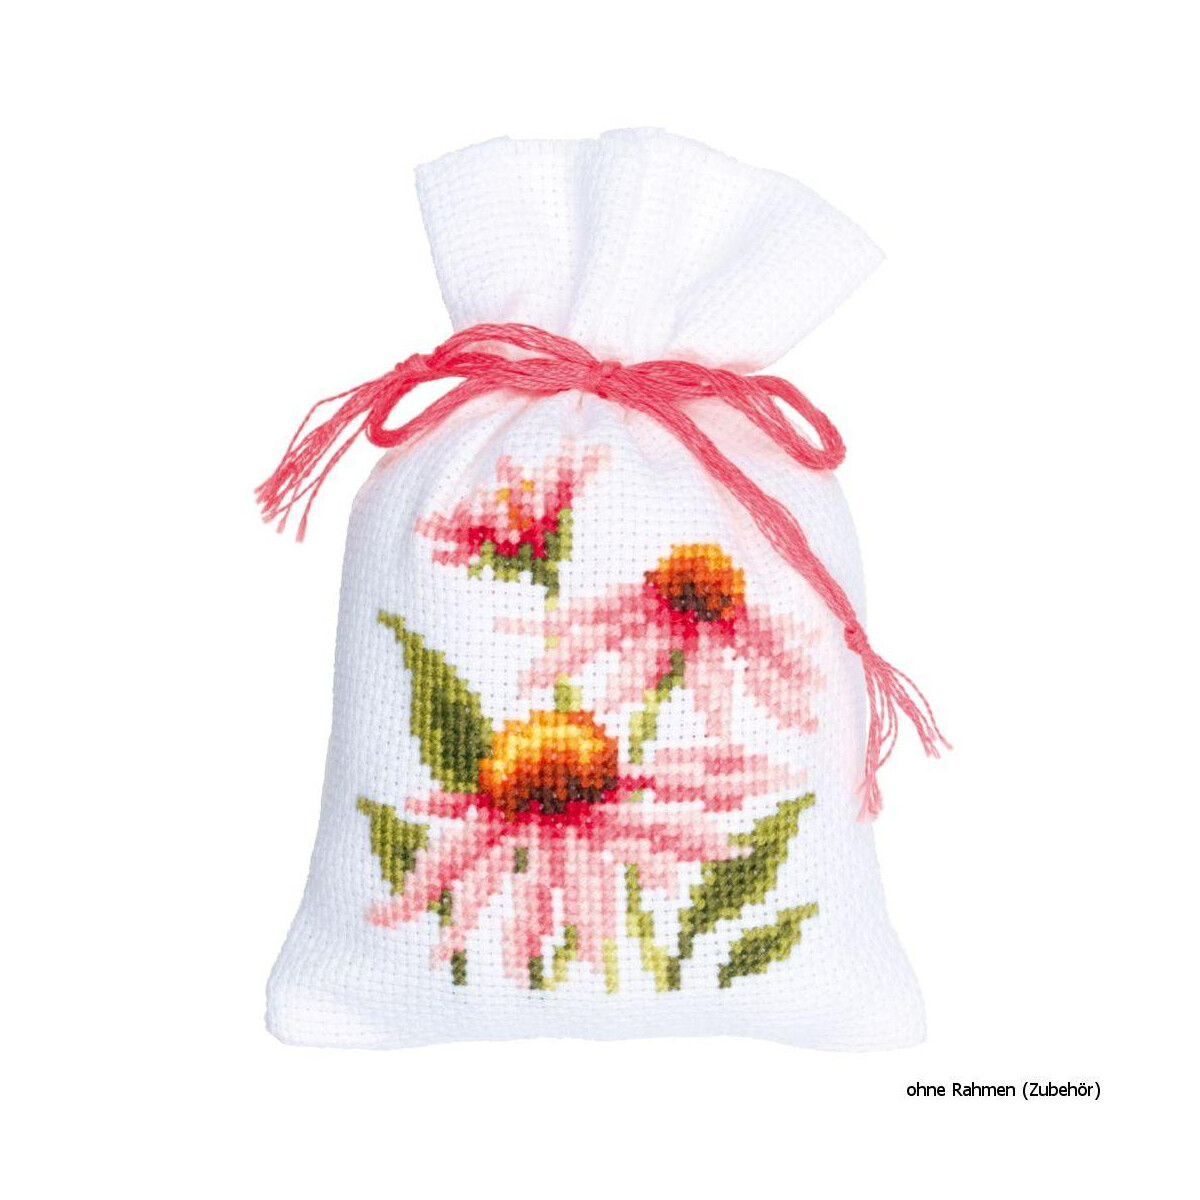 Vervaco counted herbal bags stitch kit Coneflowers and...